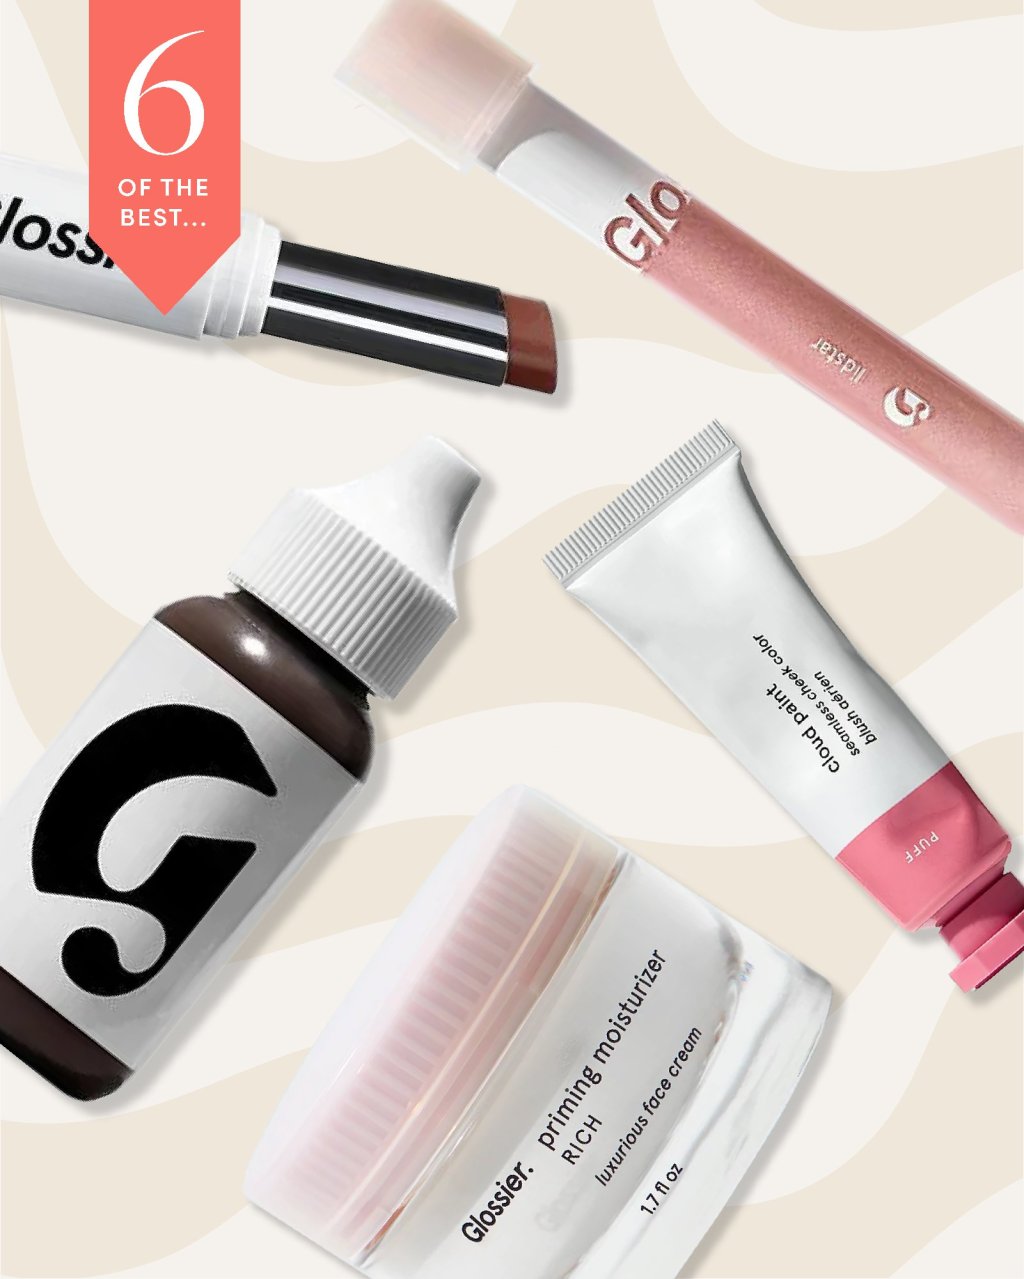 6 Of The Best Glossier Products 2023: One Writer Has Tried Them All